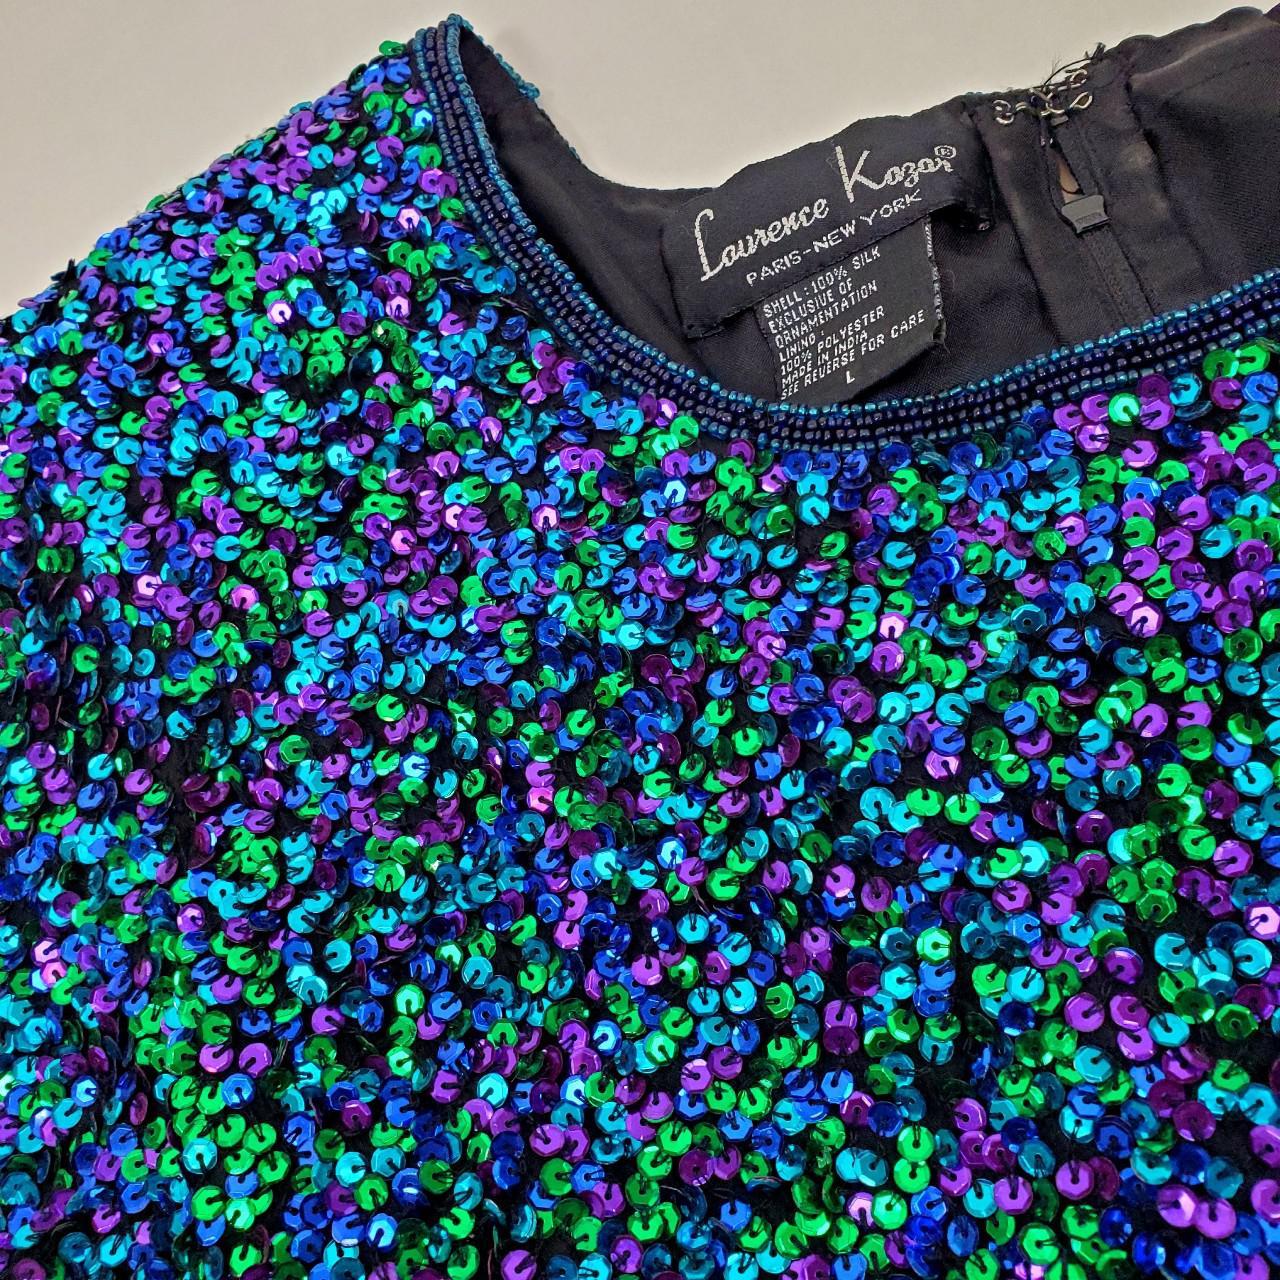 Product Image 3 - Party monster sequin blouse. 

Got